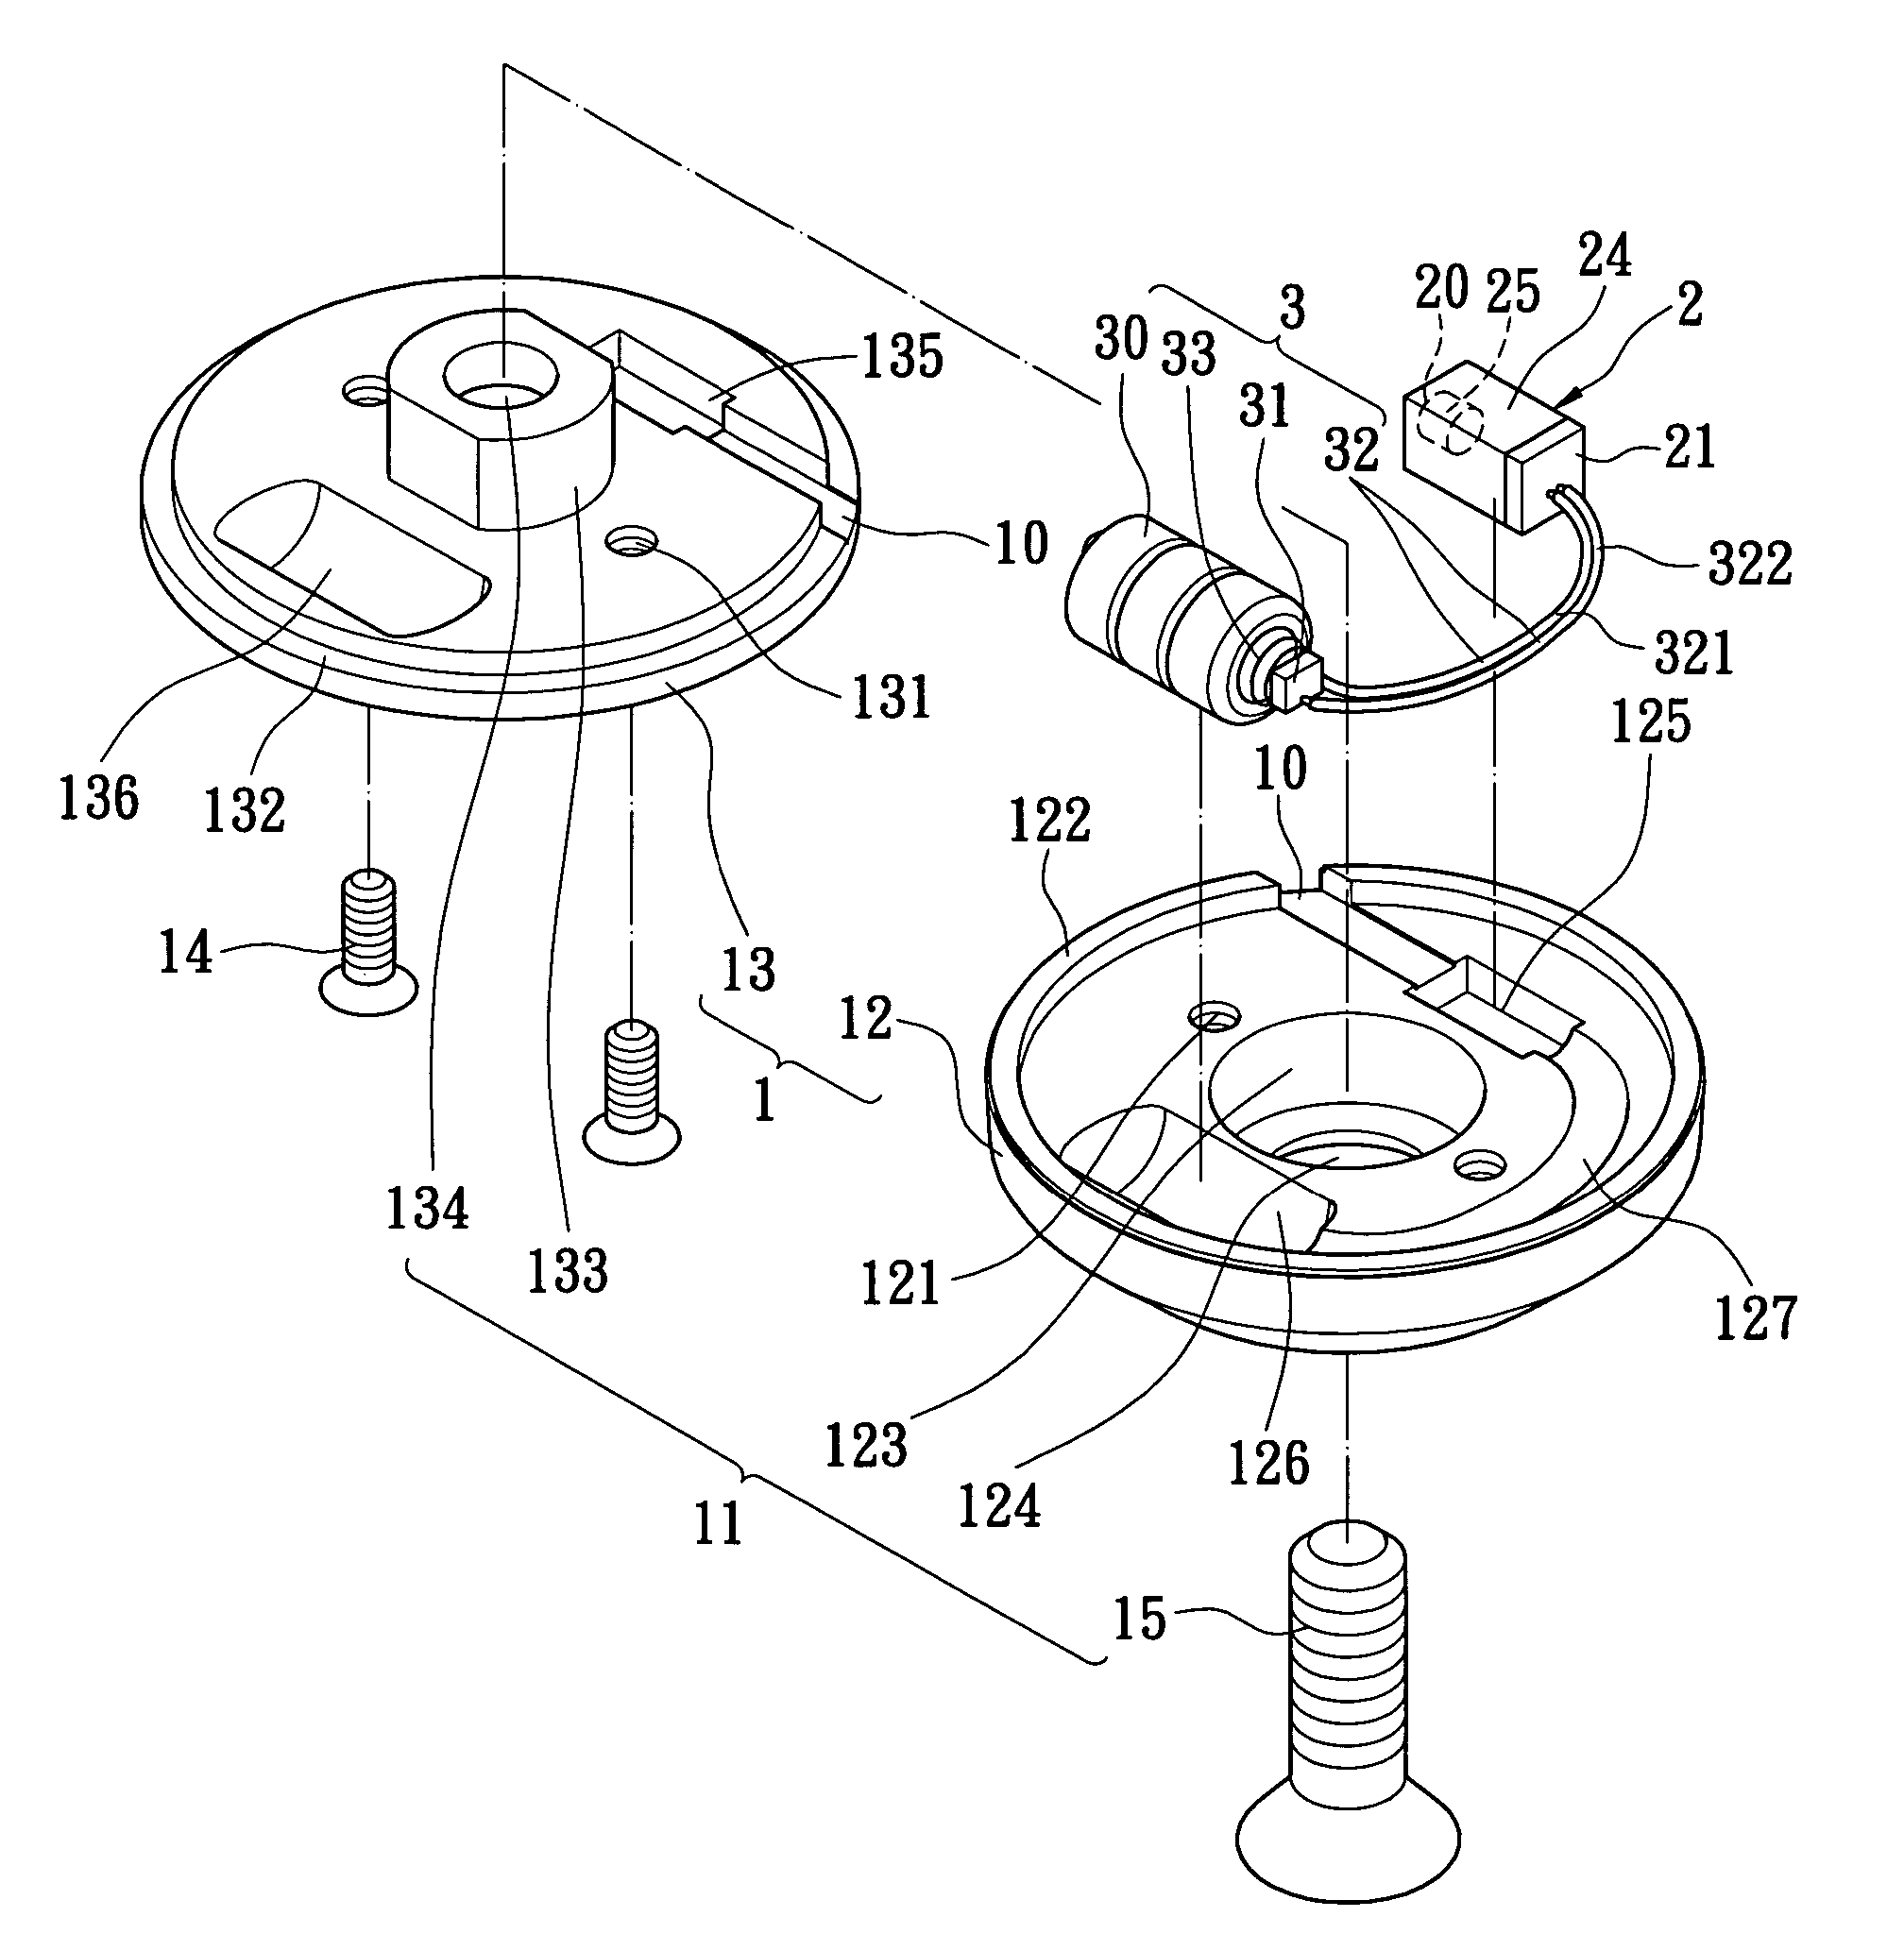 Laser alignment device of a circular saw machine